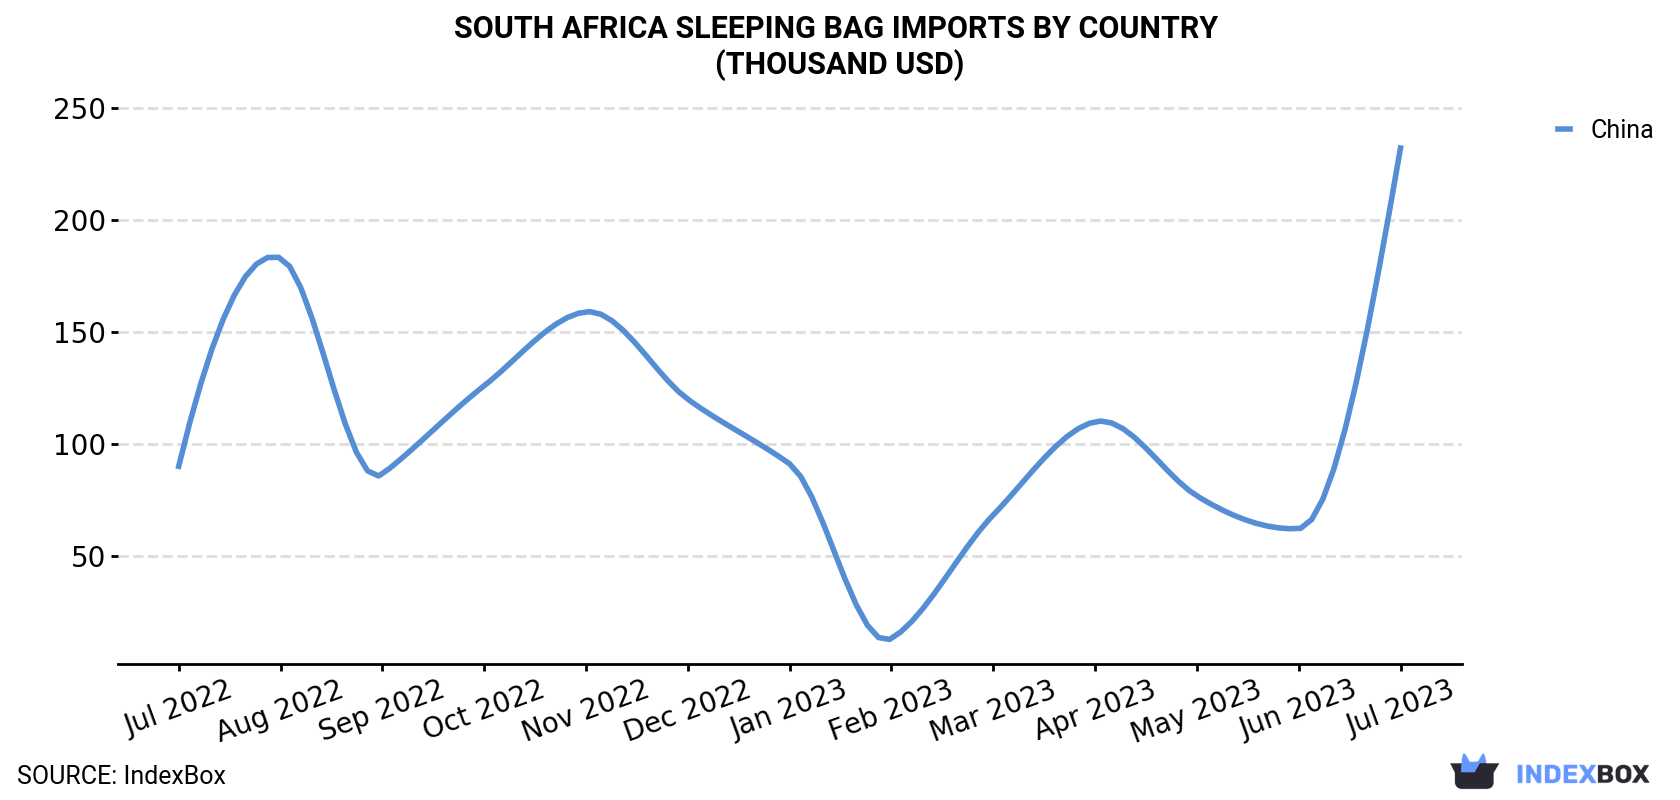 South Africa Sleeping Bag Imports By Country (Thousand USD)